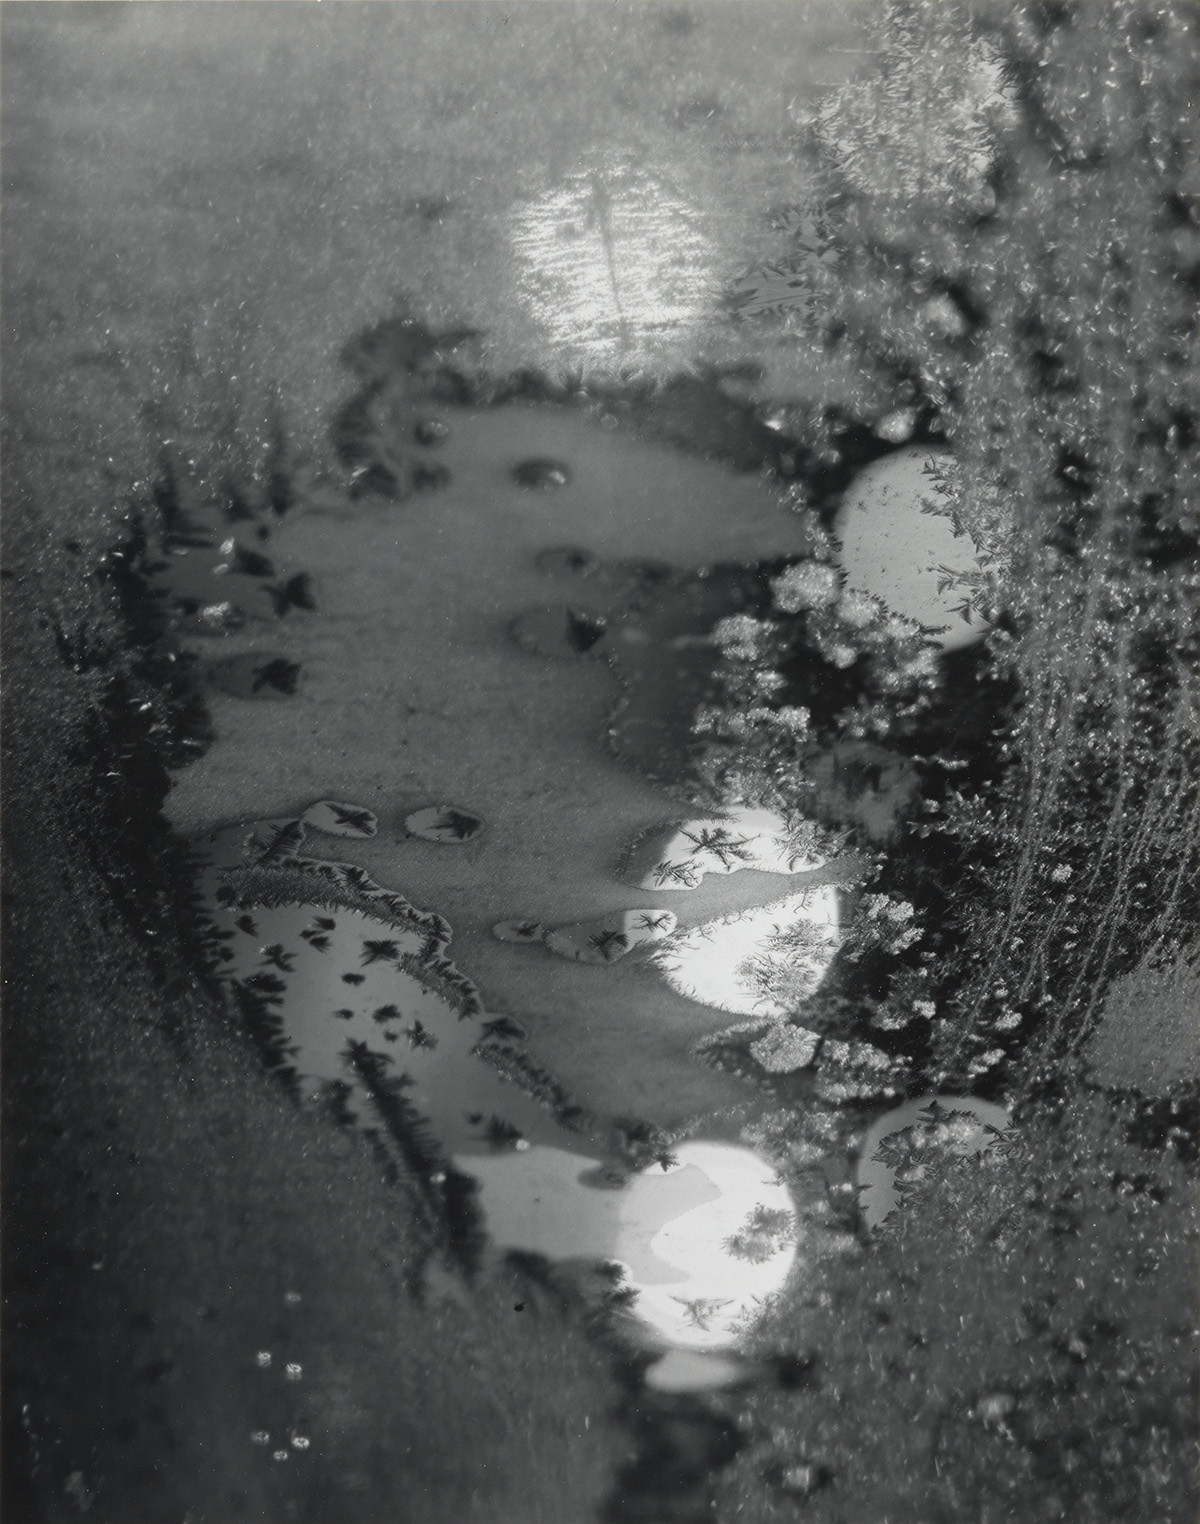 MINOR WHITE (1908-1976) Beginnings, Rochester, New York (frosted window).